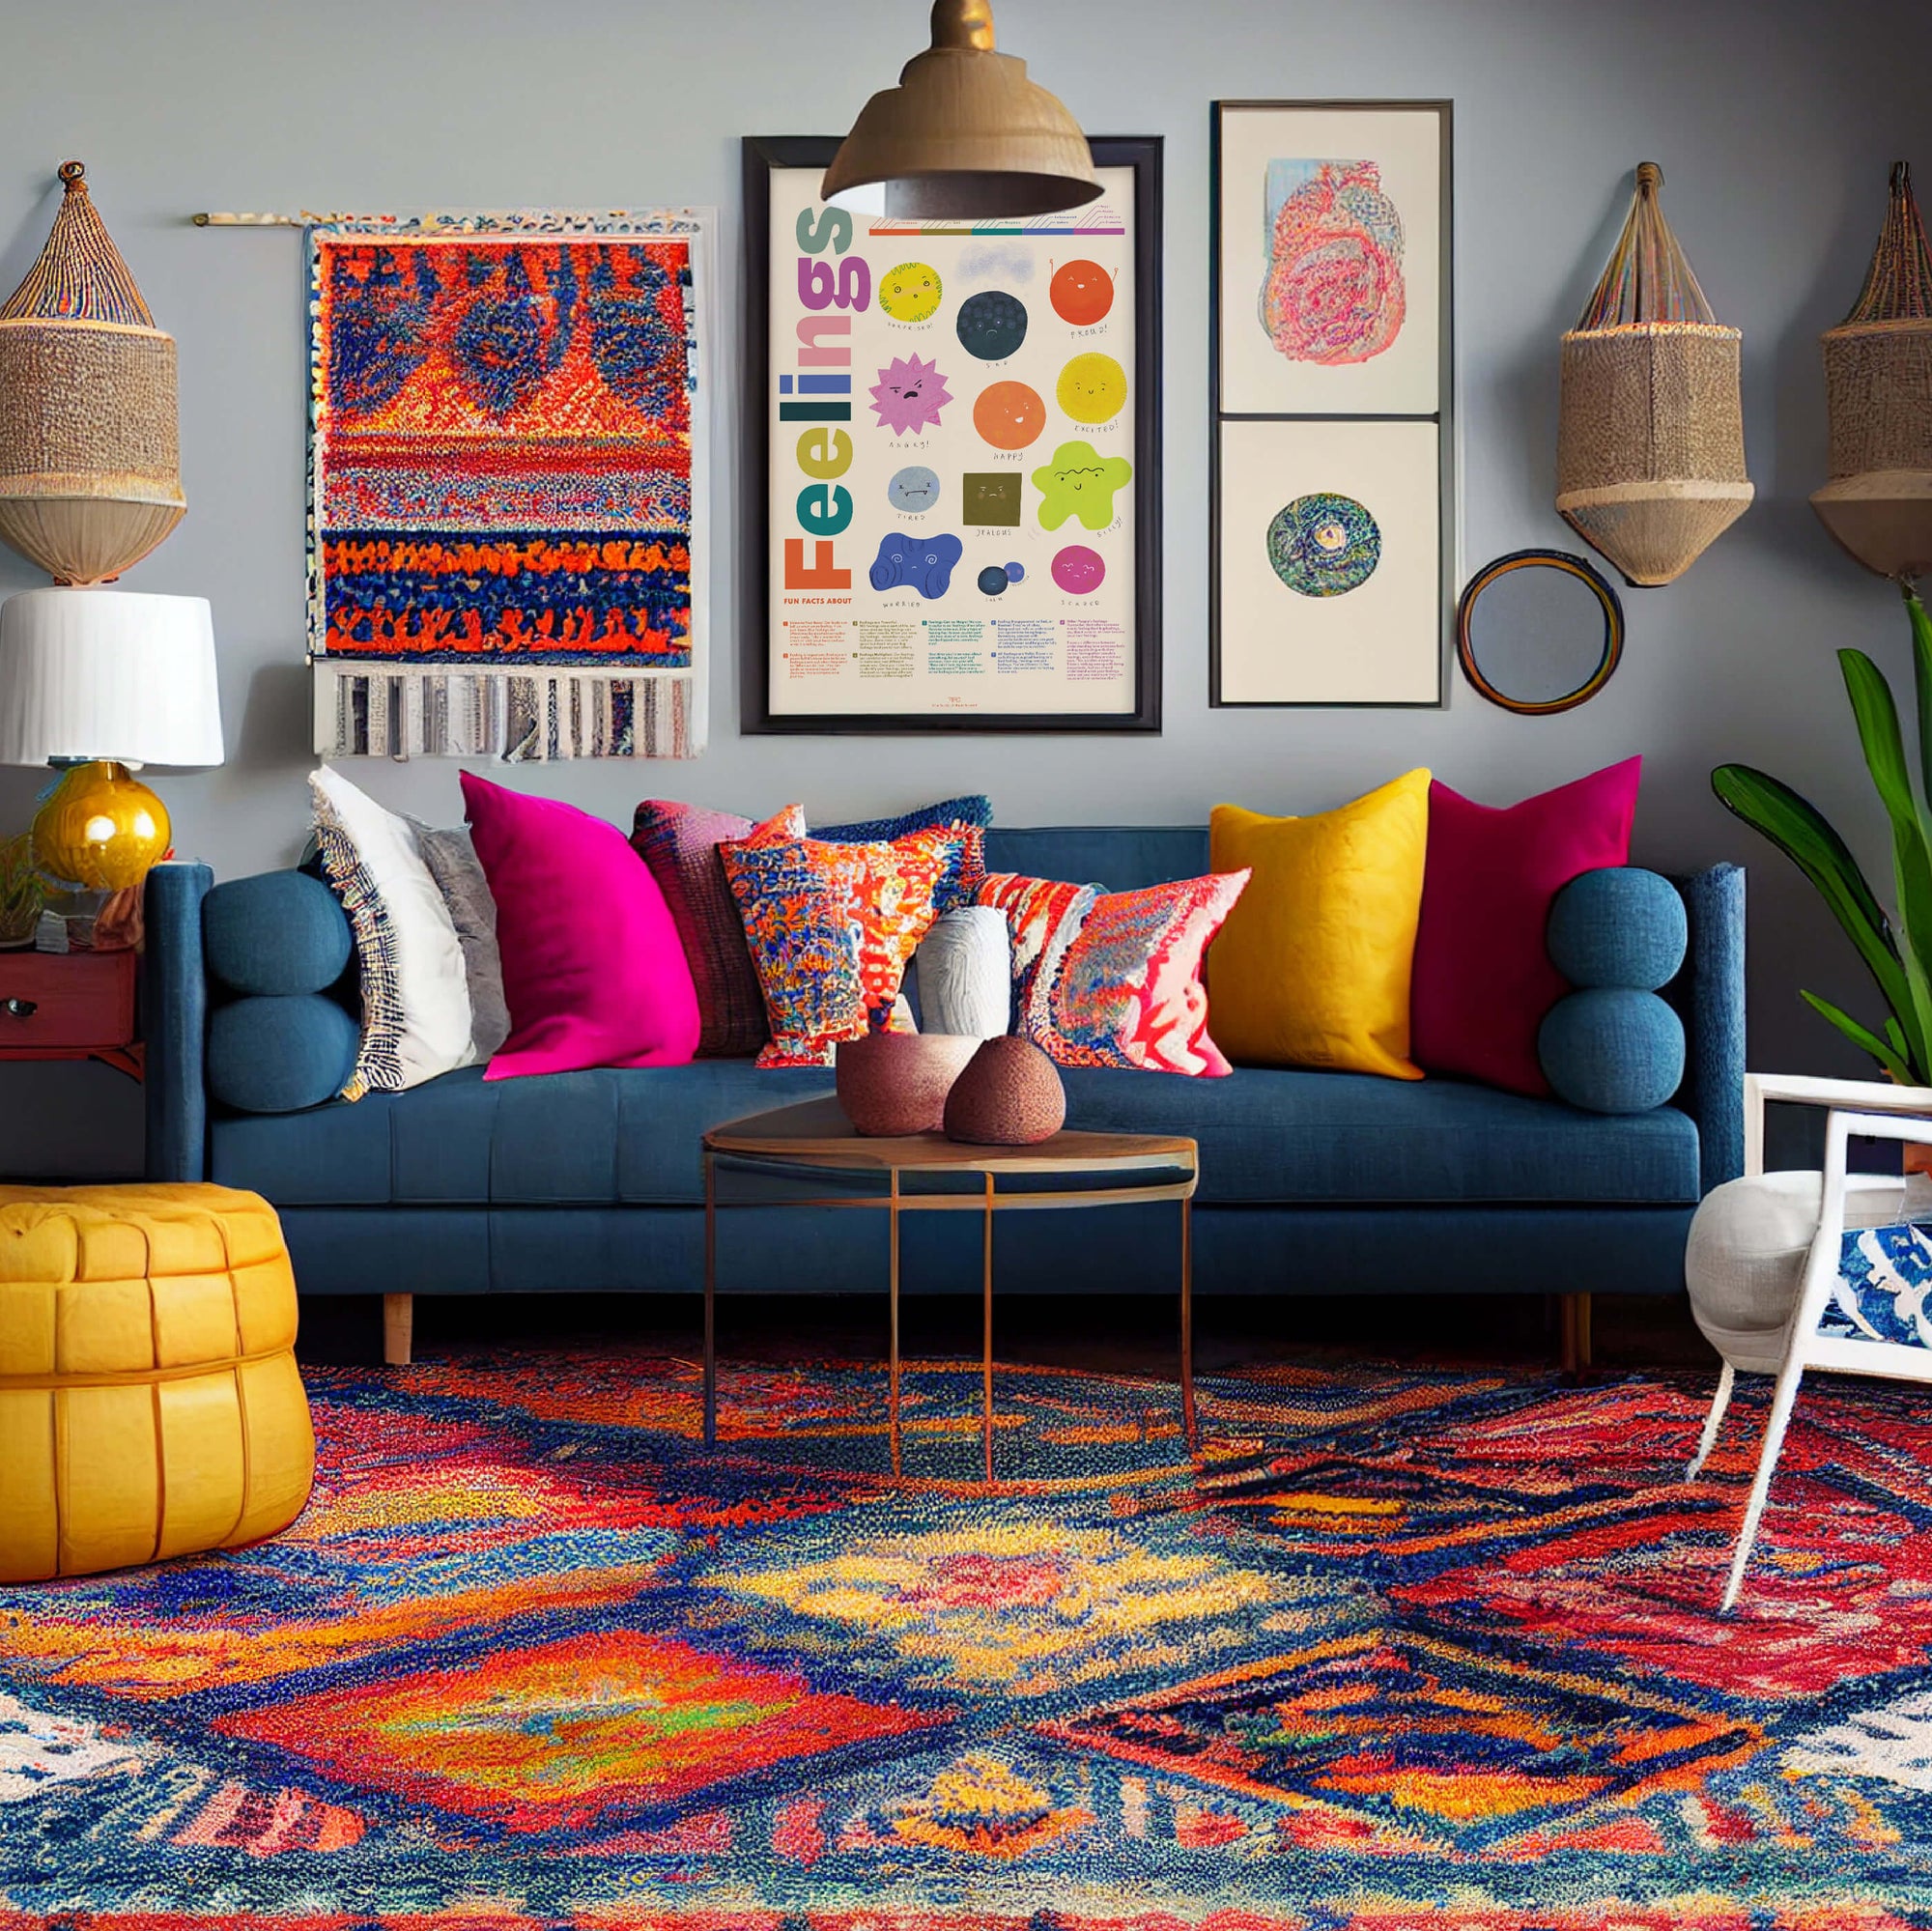 Bohemian Living Room with Fun Facts About Feelings - Illustrated Emotions Poster by Fun Fact Co.